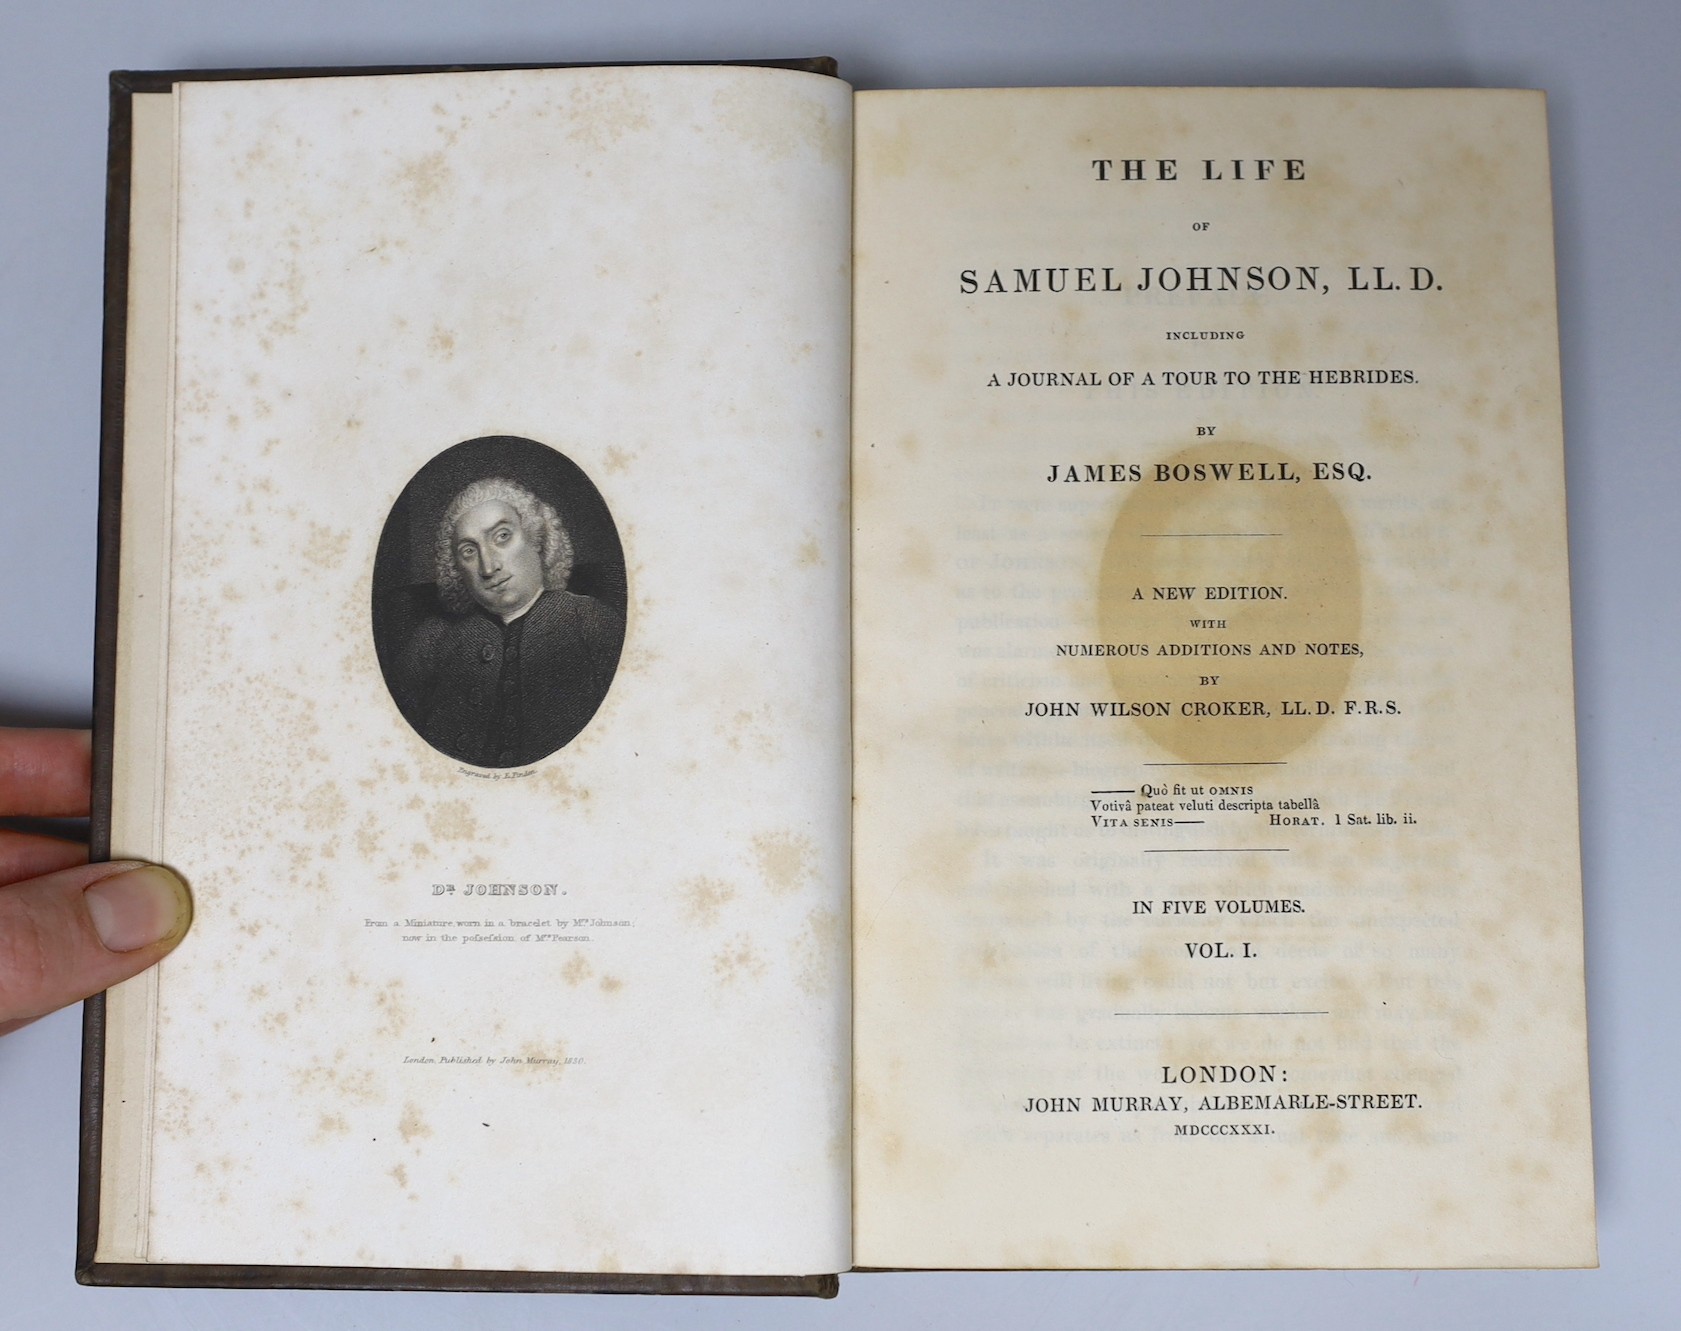 Boswell, James - Life of Johnson, with numerous additions and notes by John Wilson Croker, 5 vols, 8vo, calf, John Murray, 1831 and Johnson, Samuel - Journey to the Western Isles, 1st edition, 6 line errata at end, 8vo,